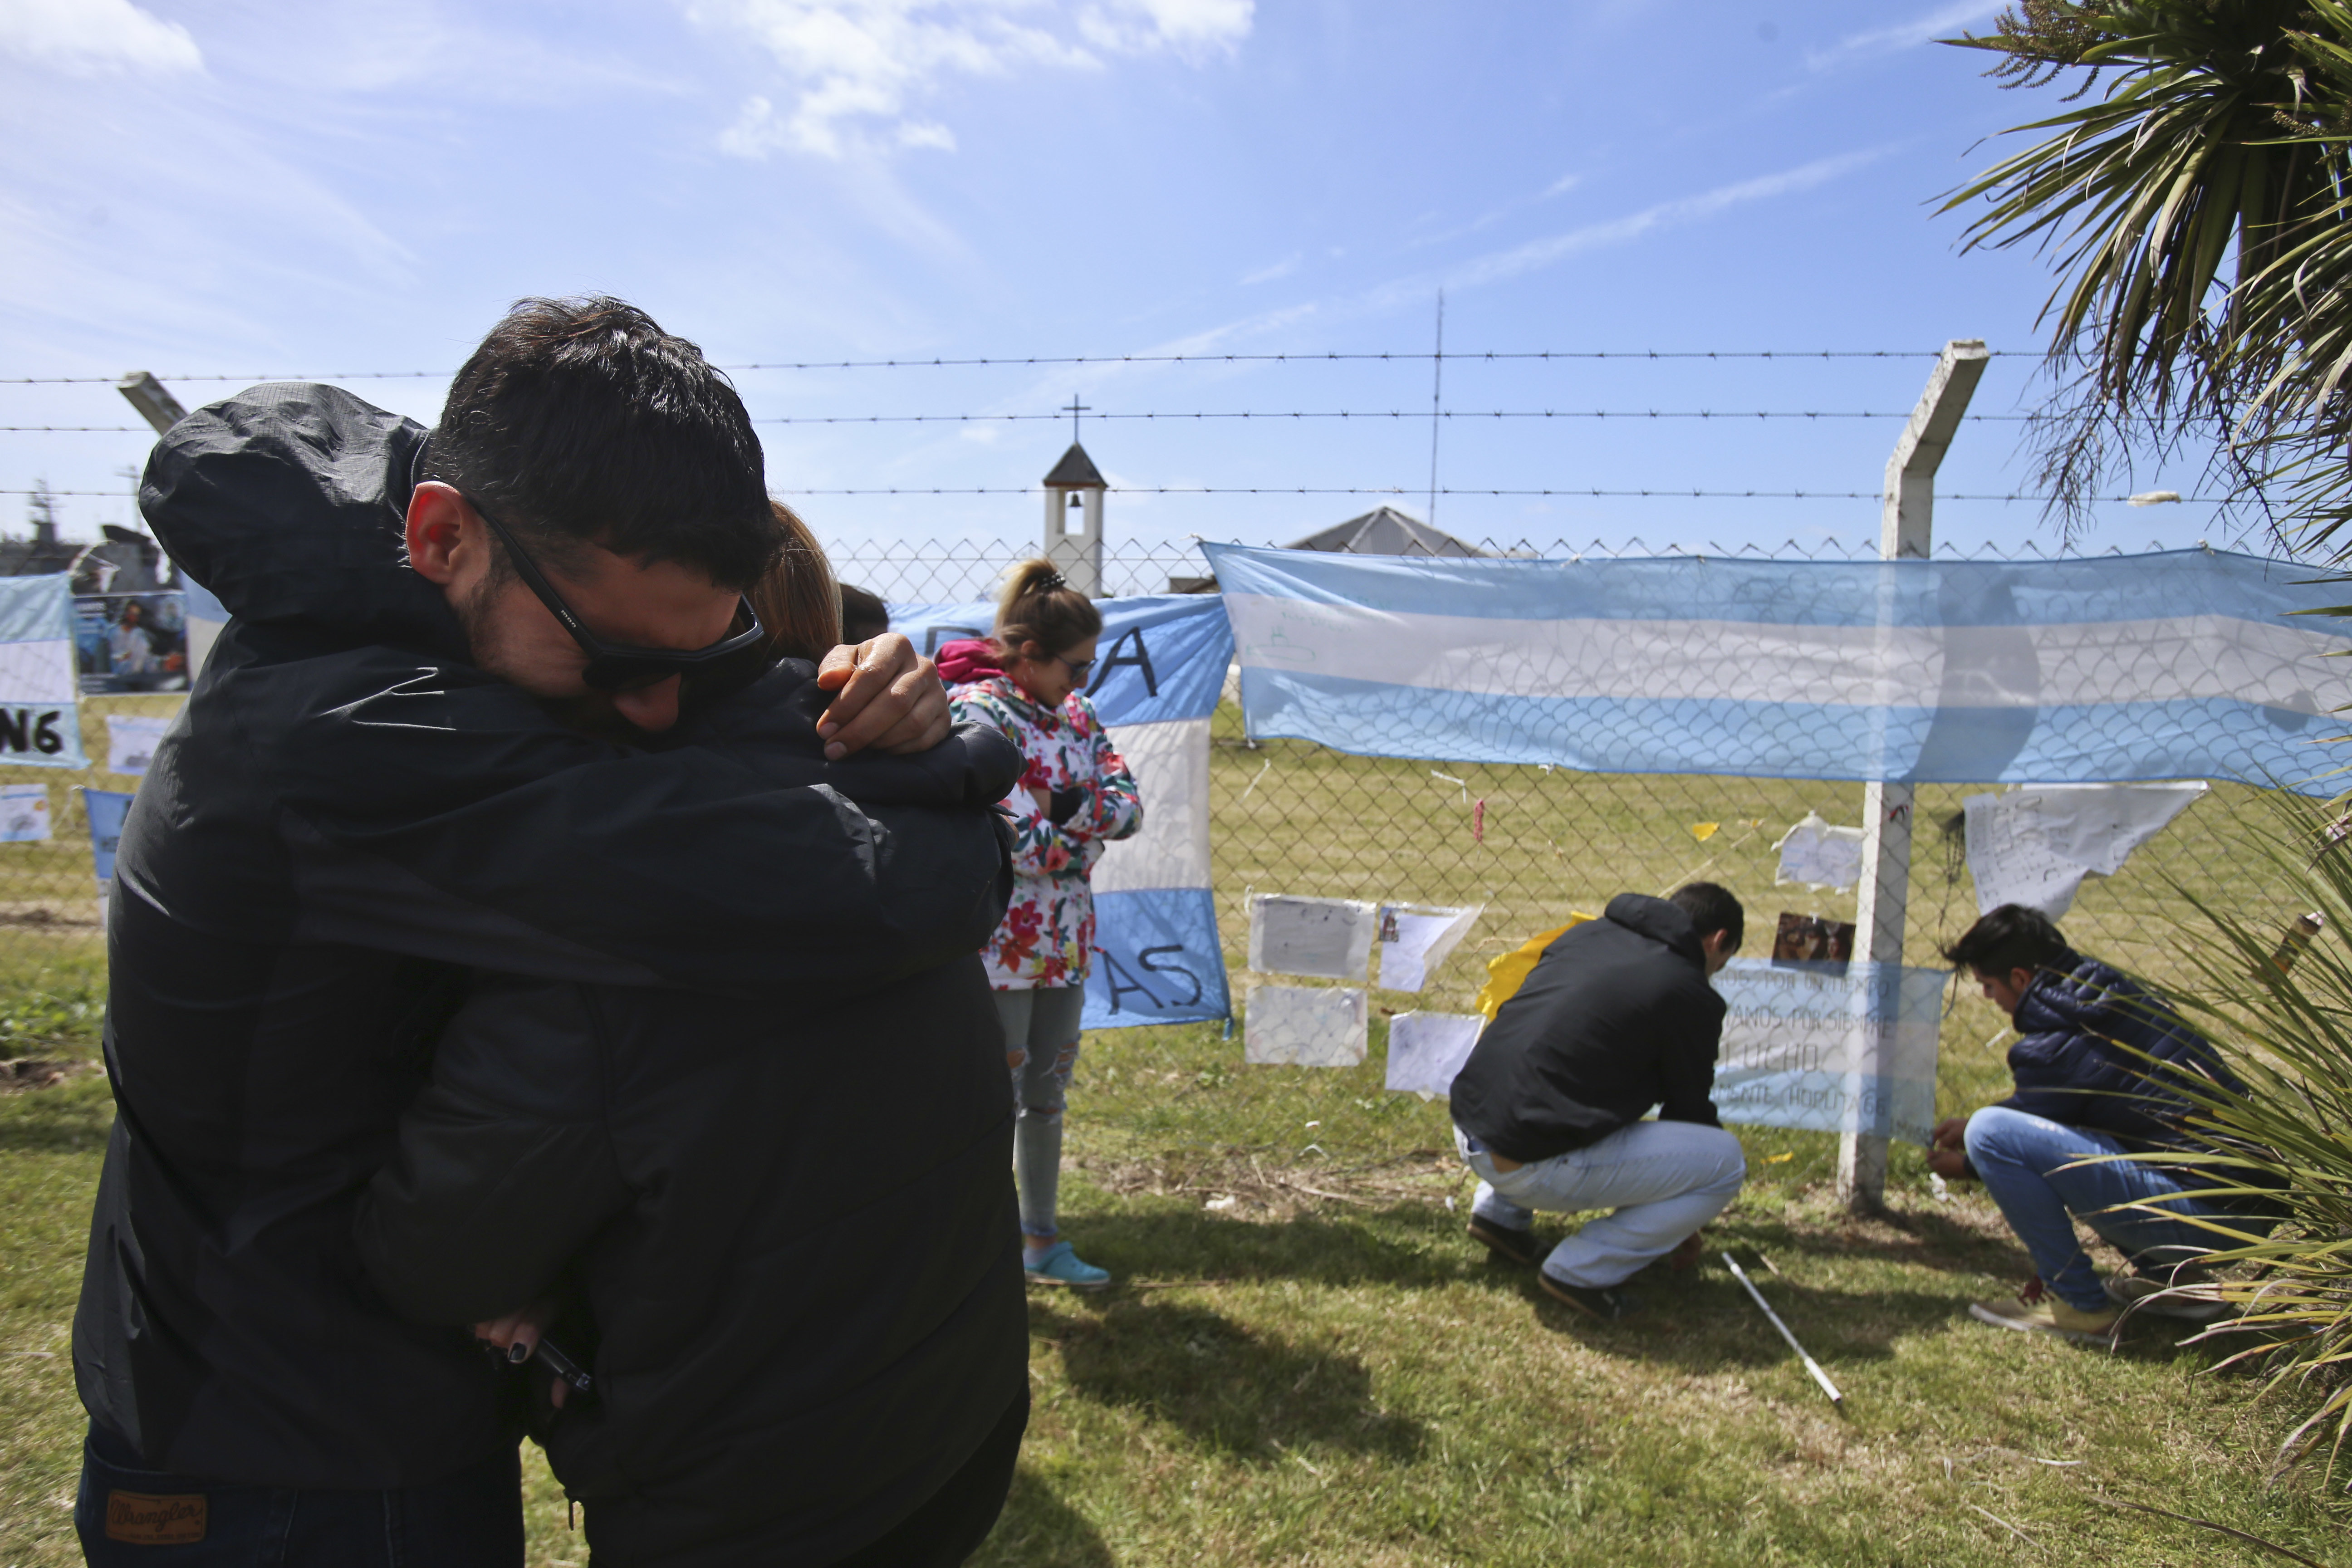 Relatives and friends of Alejandro Tagliaprieta, a crew member on the missing ARA San Juan submarine, embrace at the naval base where people hang flags and messages on the fence in Mar de Plata, Argentina, Friday, Nov. 24, 2017. The navy says an explosion occurred near the time and place where the sub went missing on Nov. 15. That's led some to give up hope. (AP Photo/Esteban Felix)